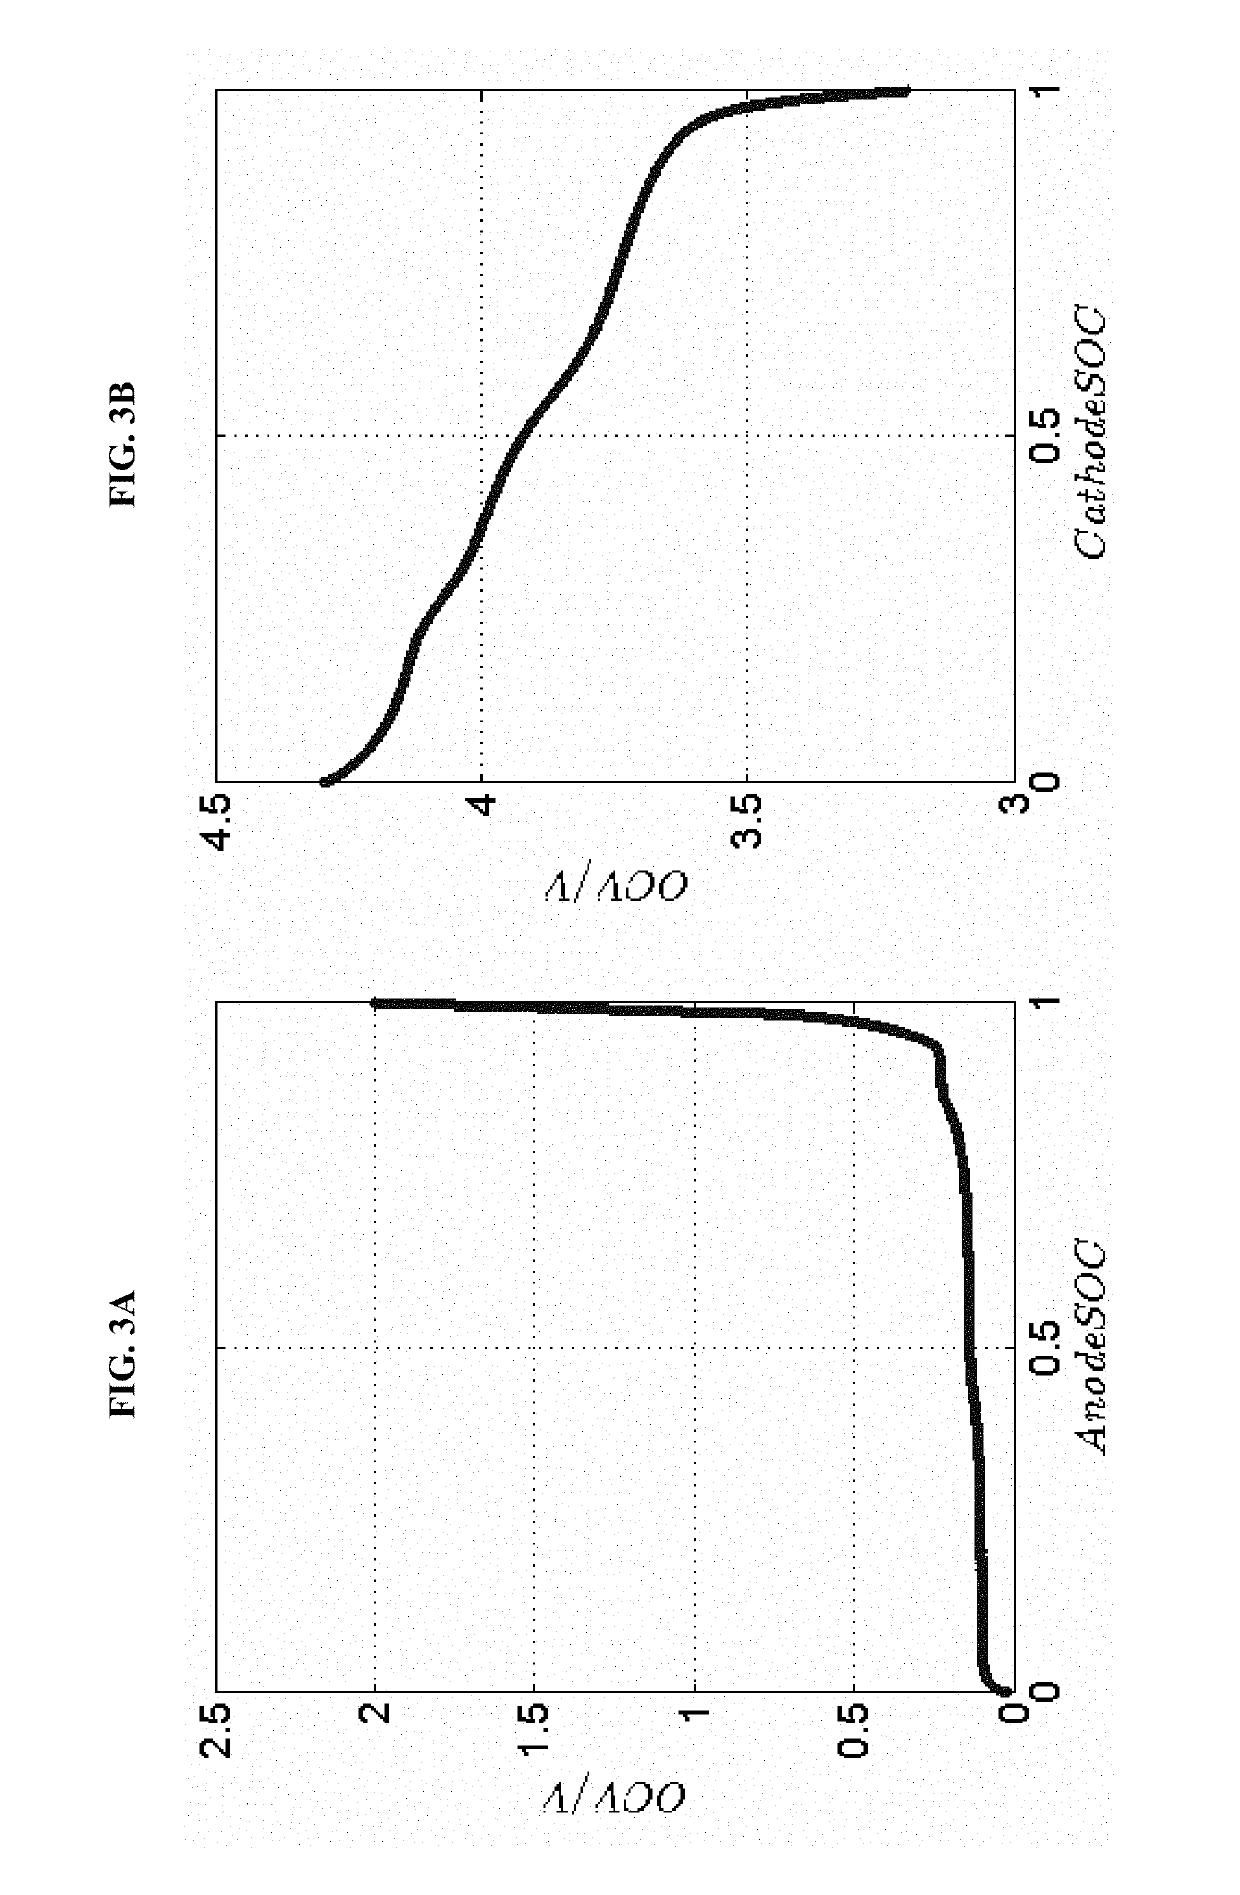 Methods for online estimation of battery capacity and state of health